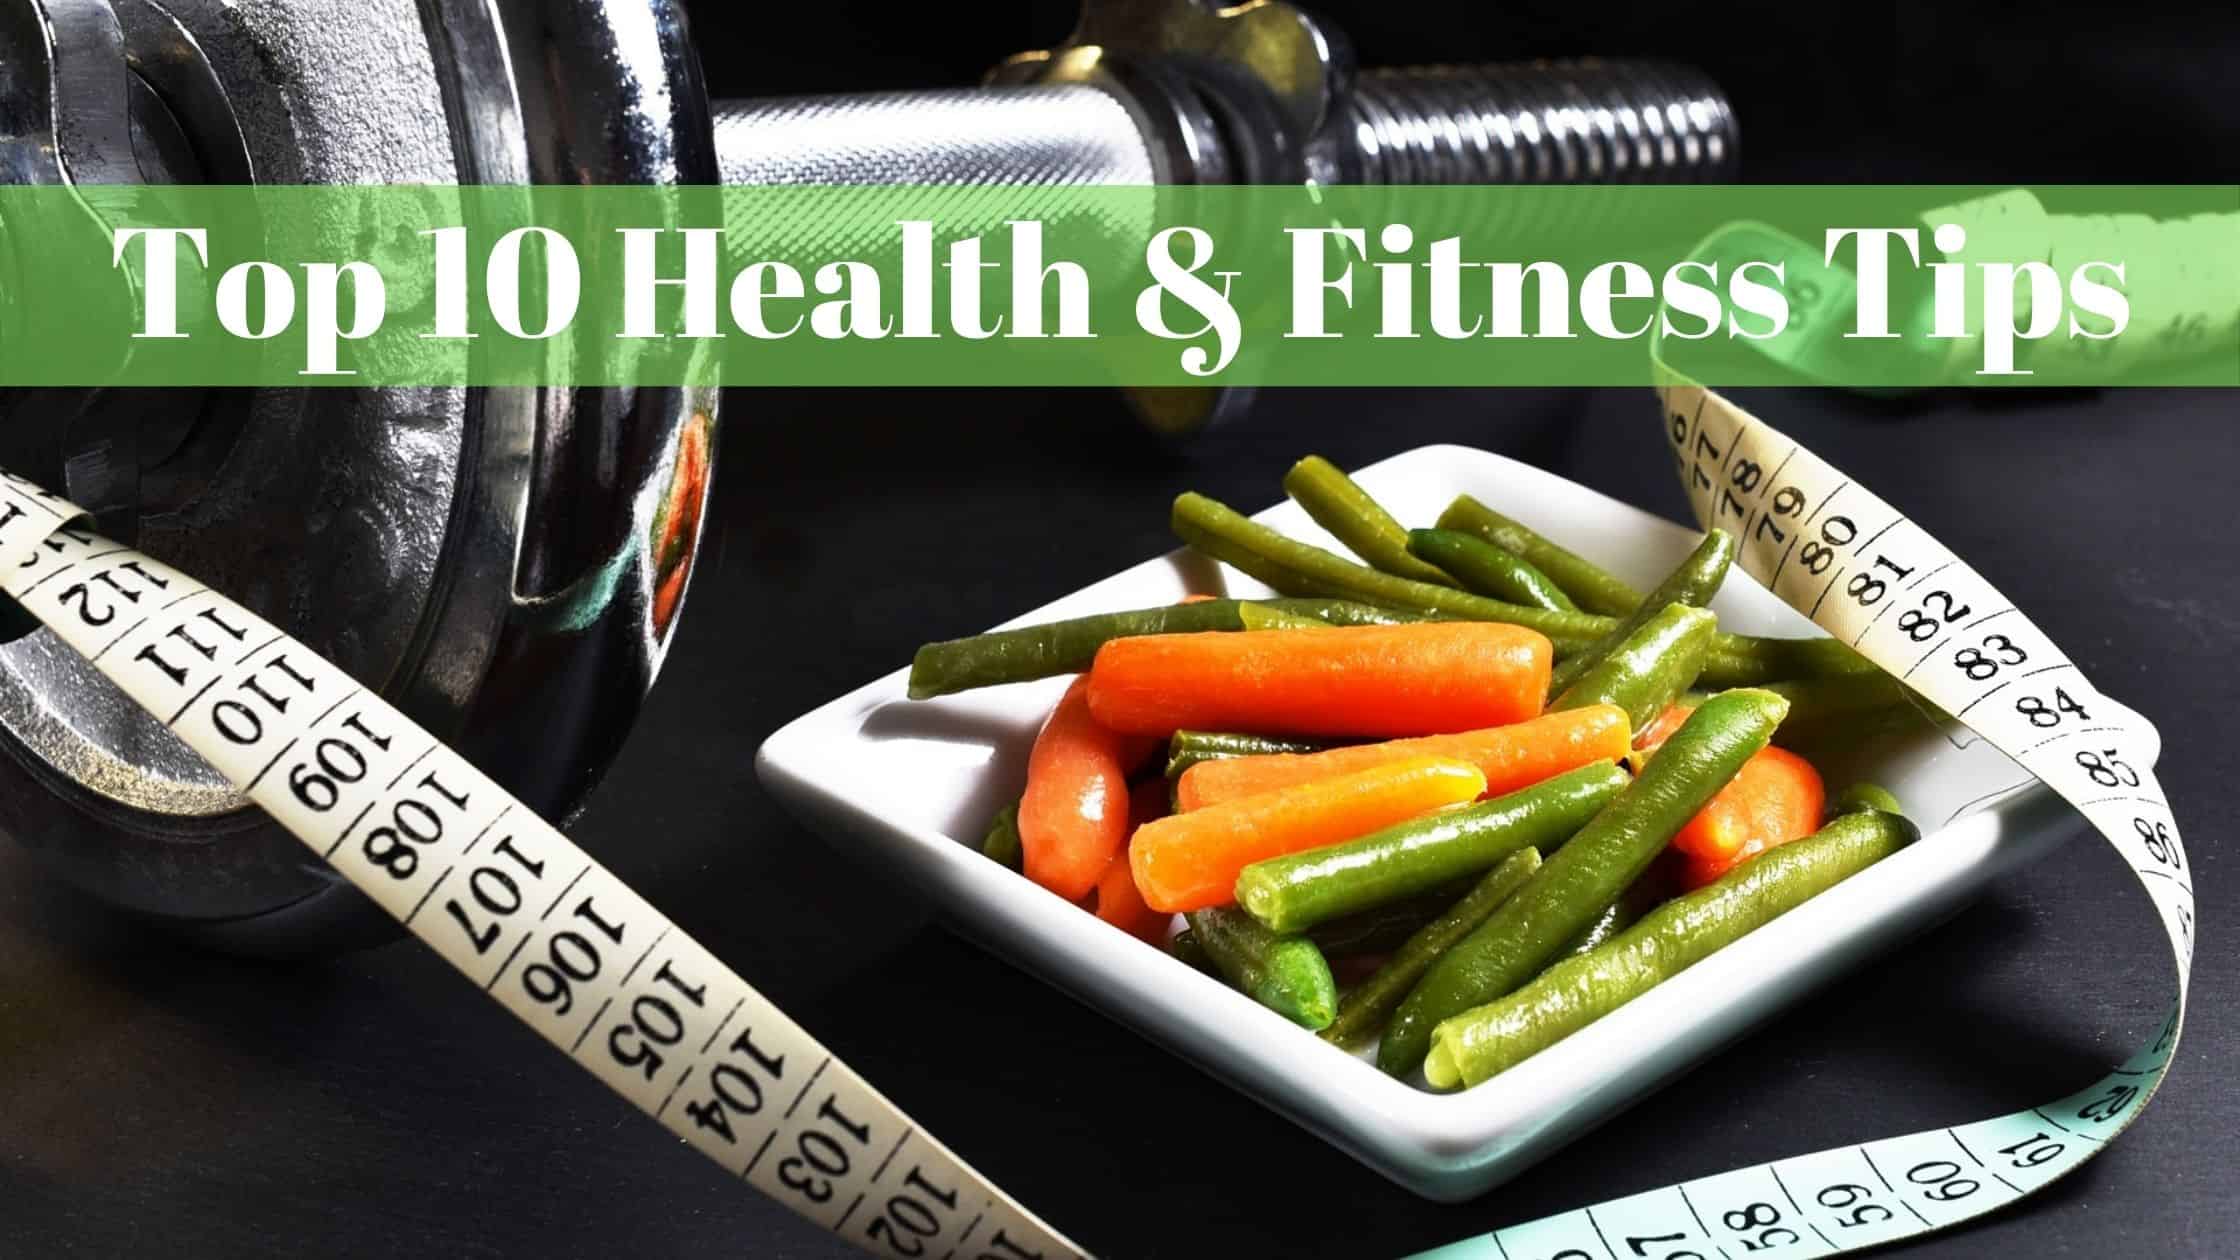 Top 10 Health & Fitness Tips